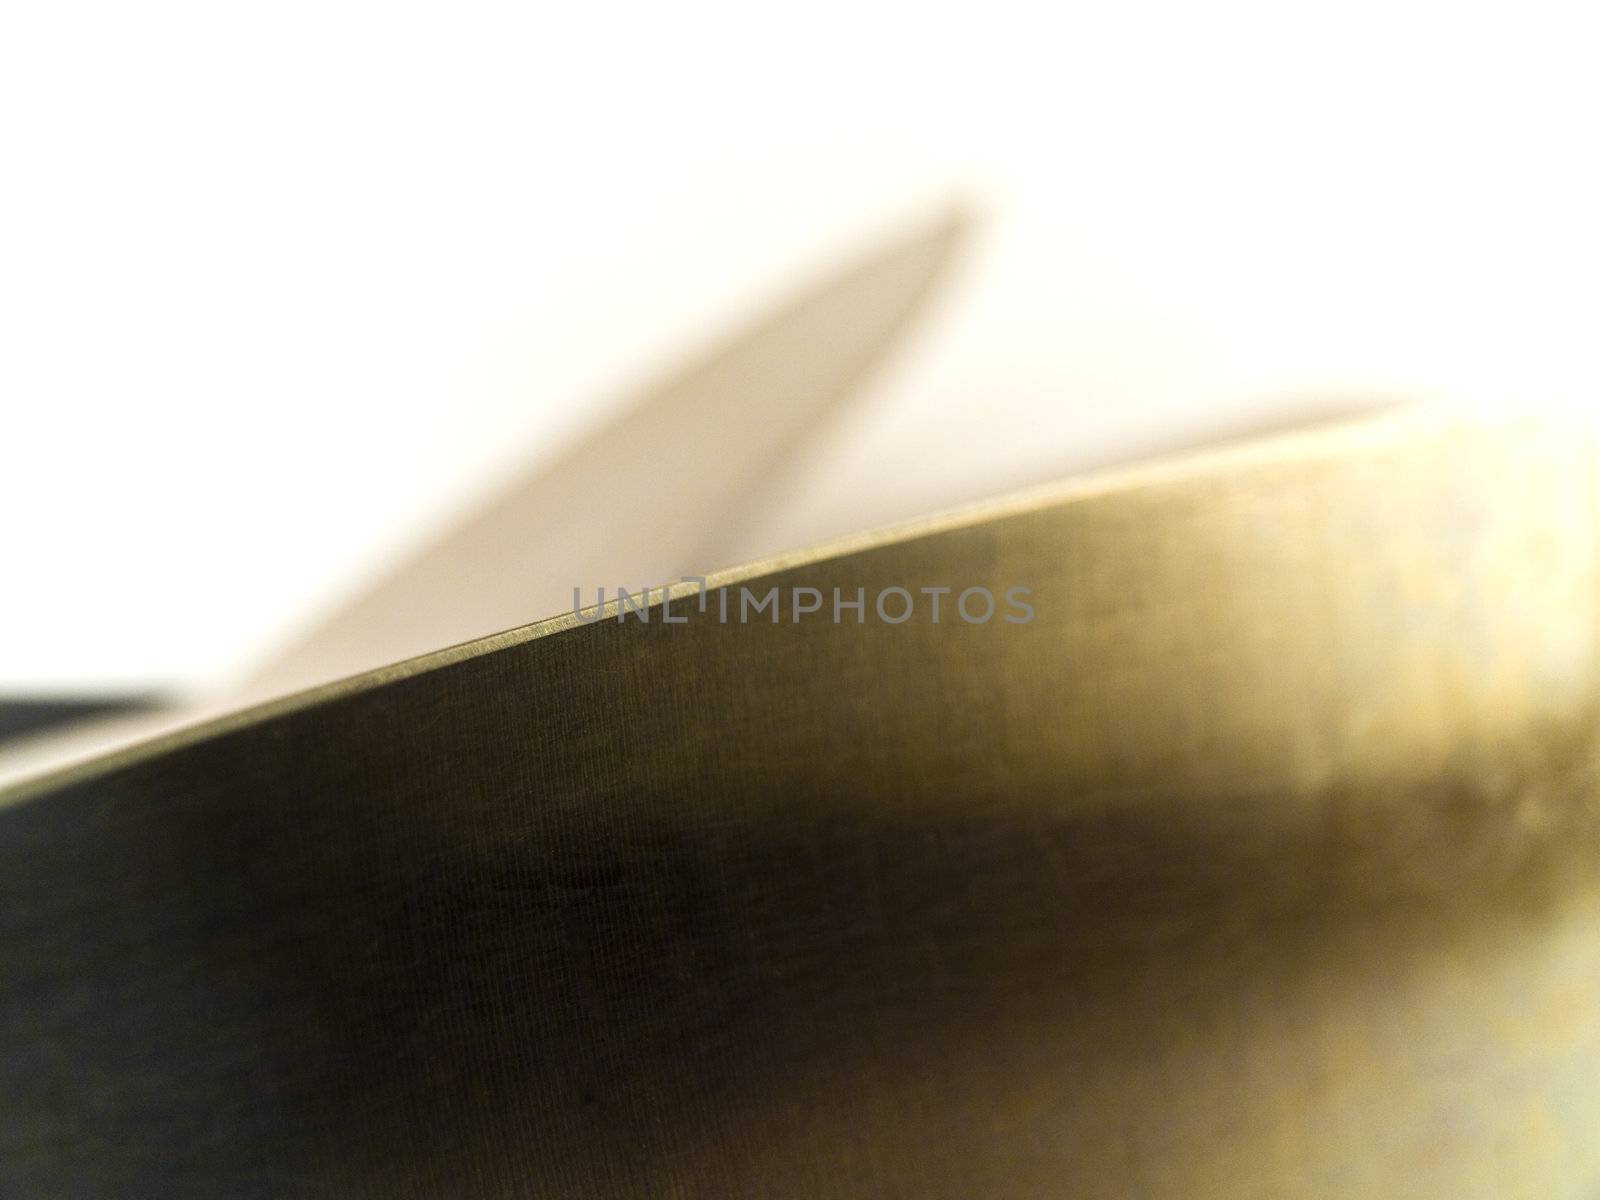 The Cutting Edge of a Knife on White Background by bobbigmac